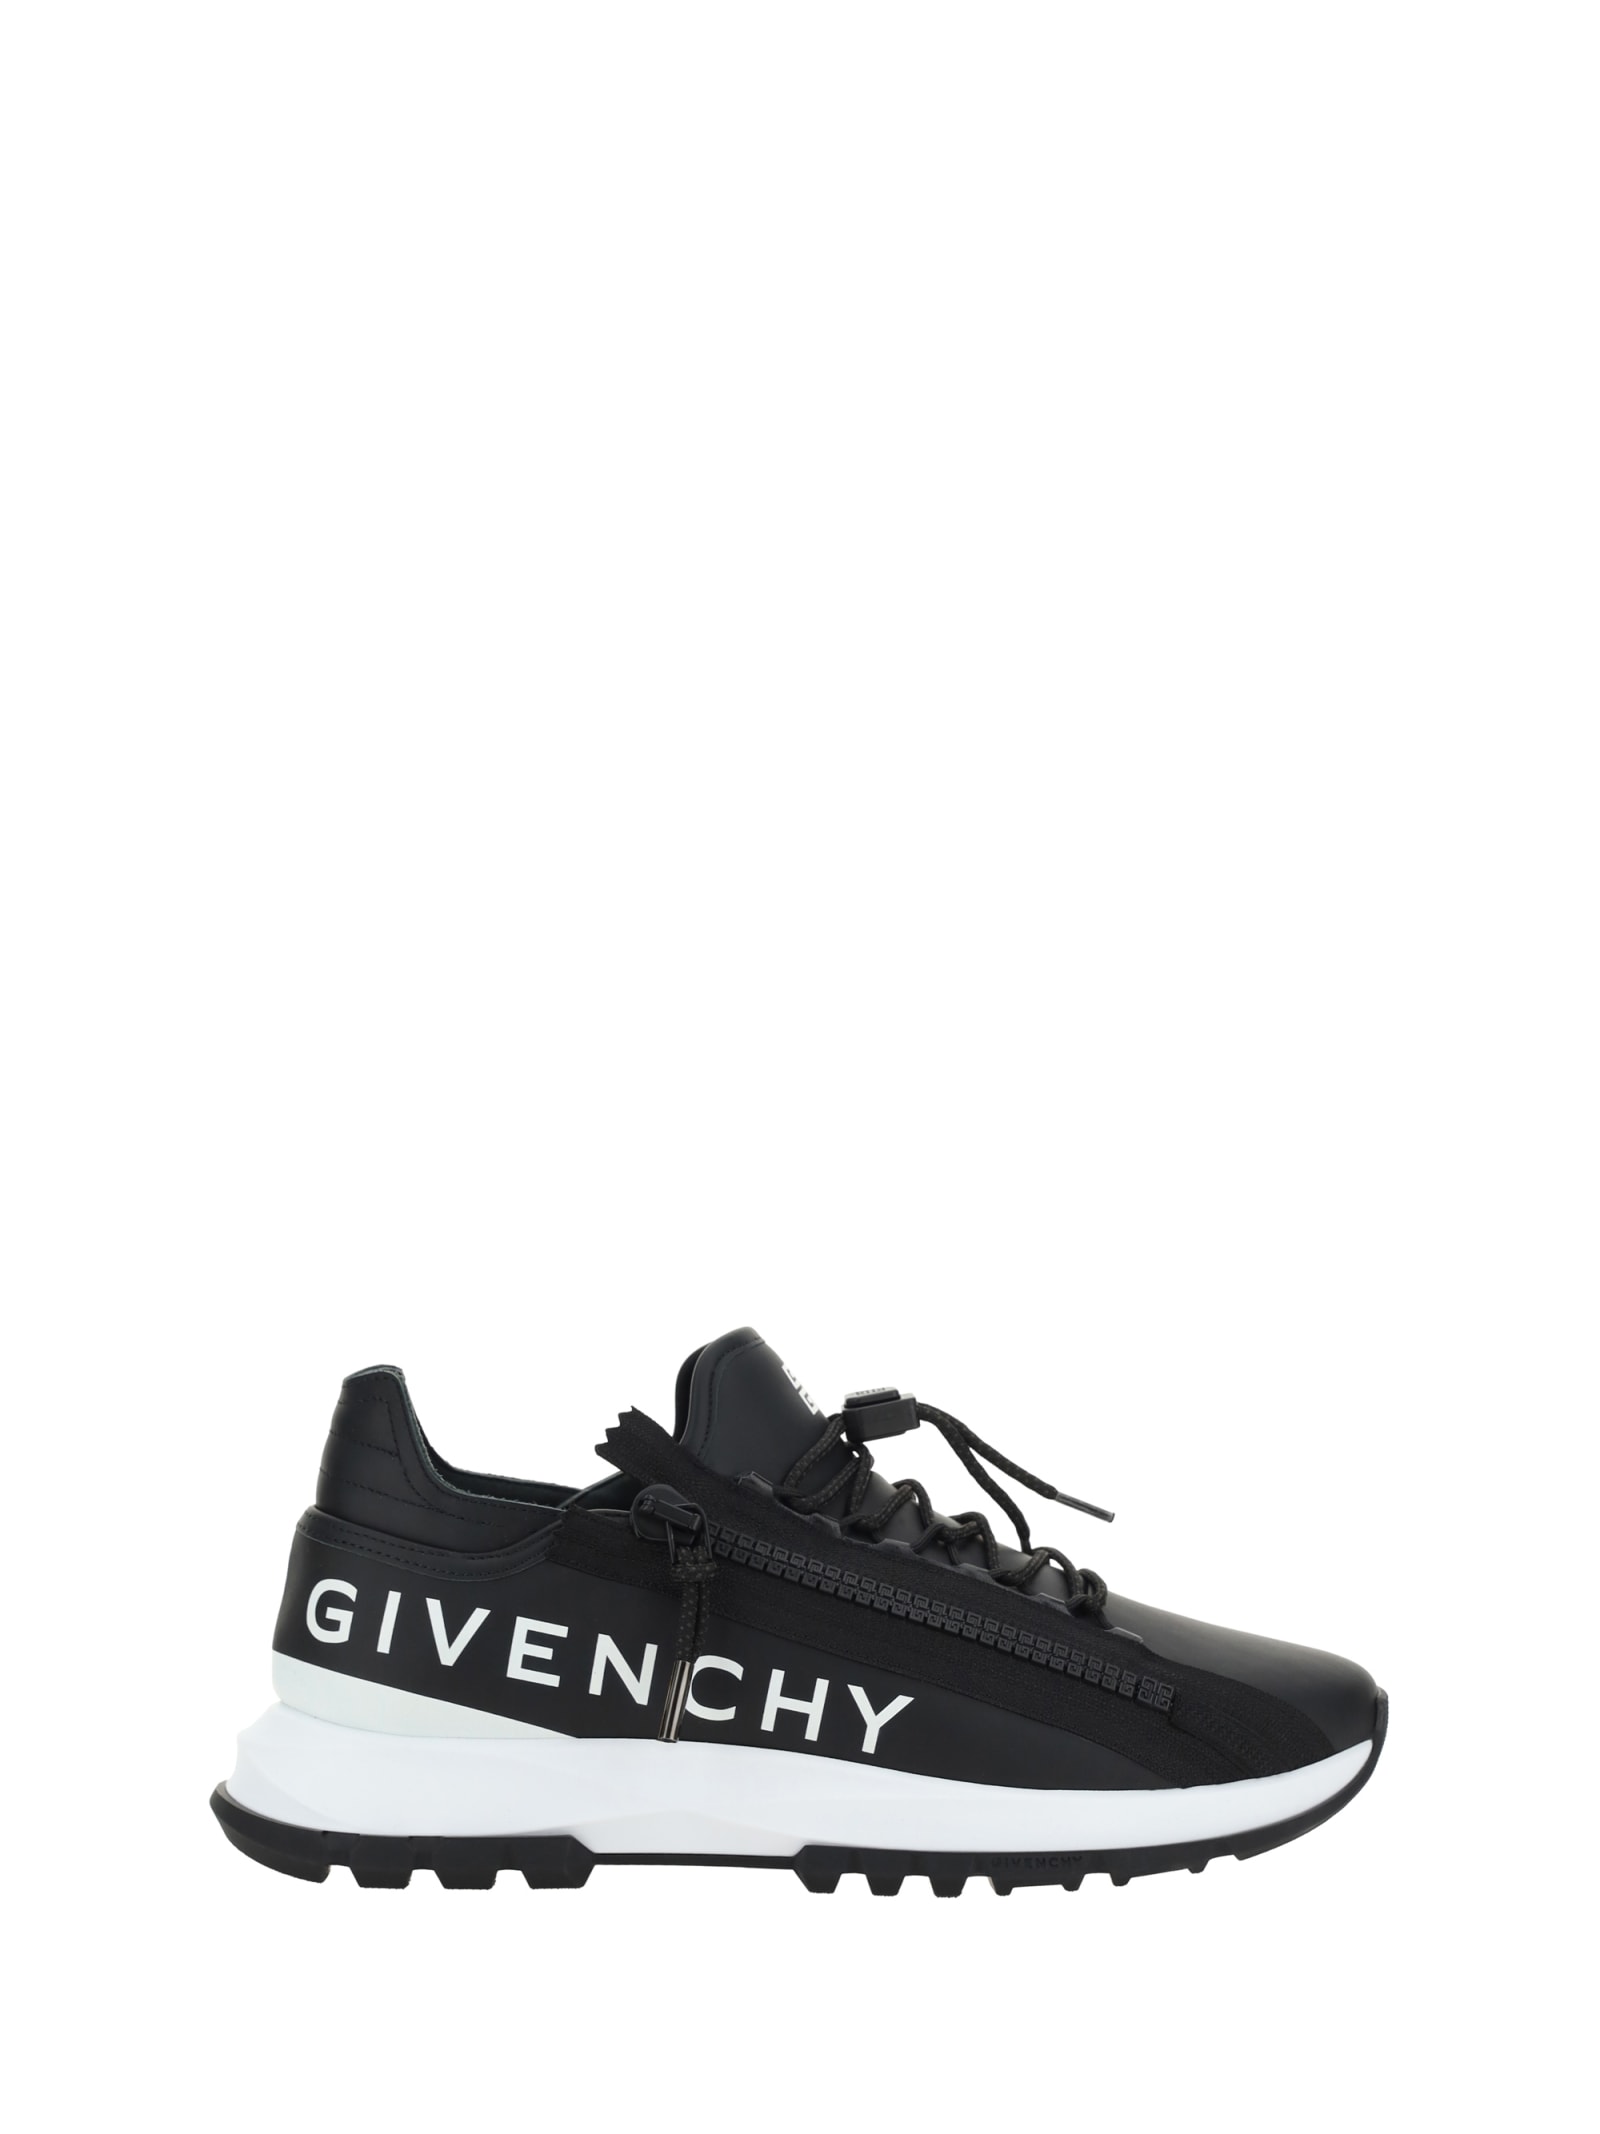 Givenchy Spectre Runner Trainers In White